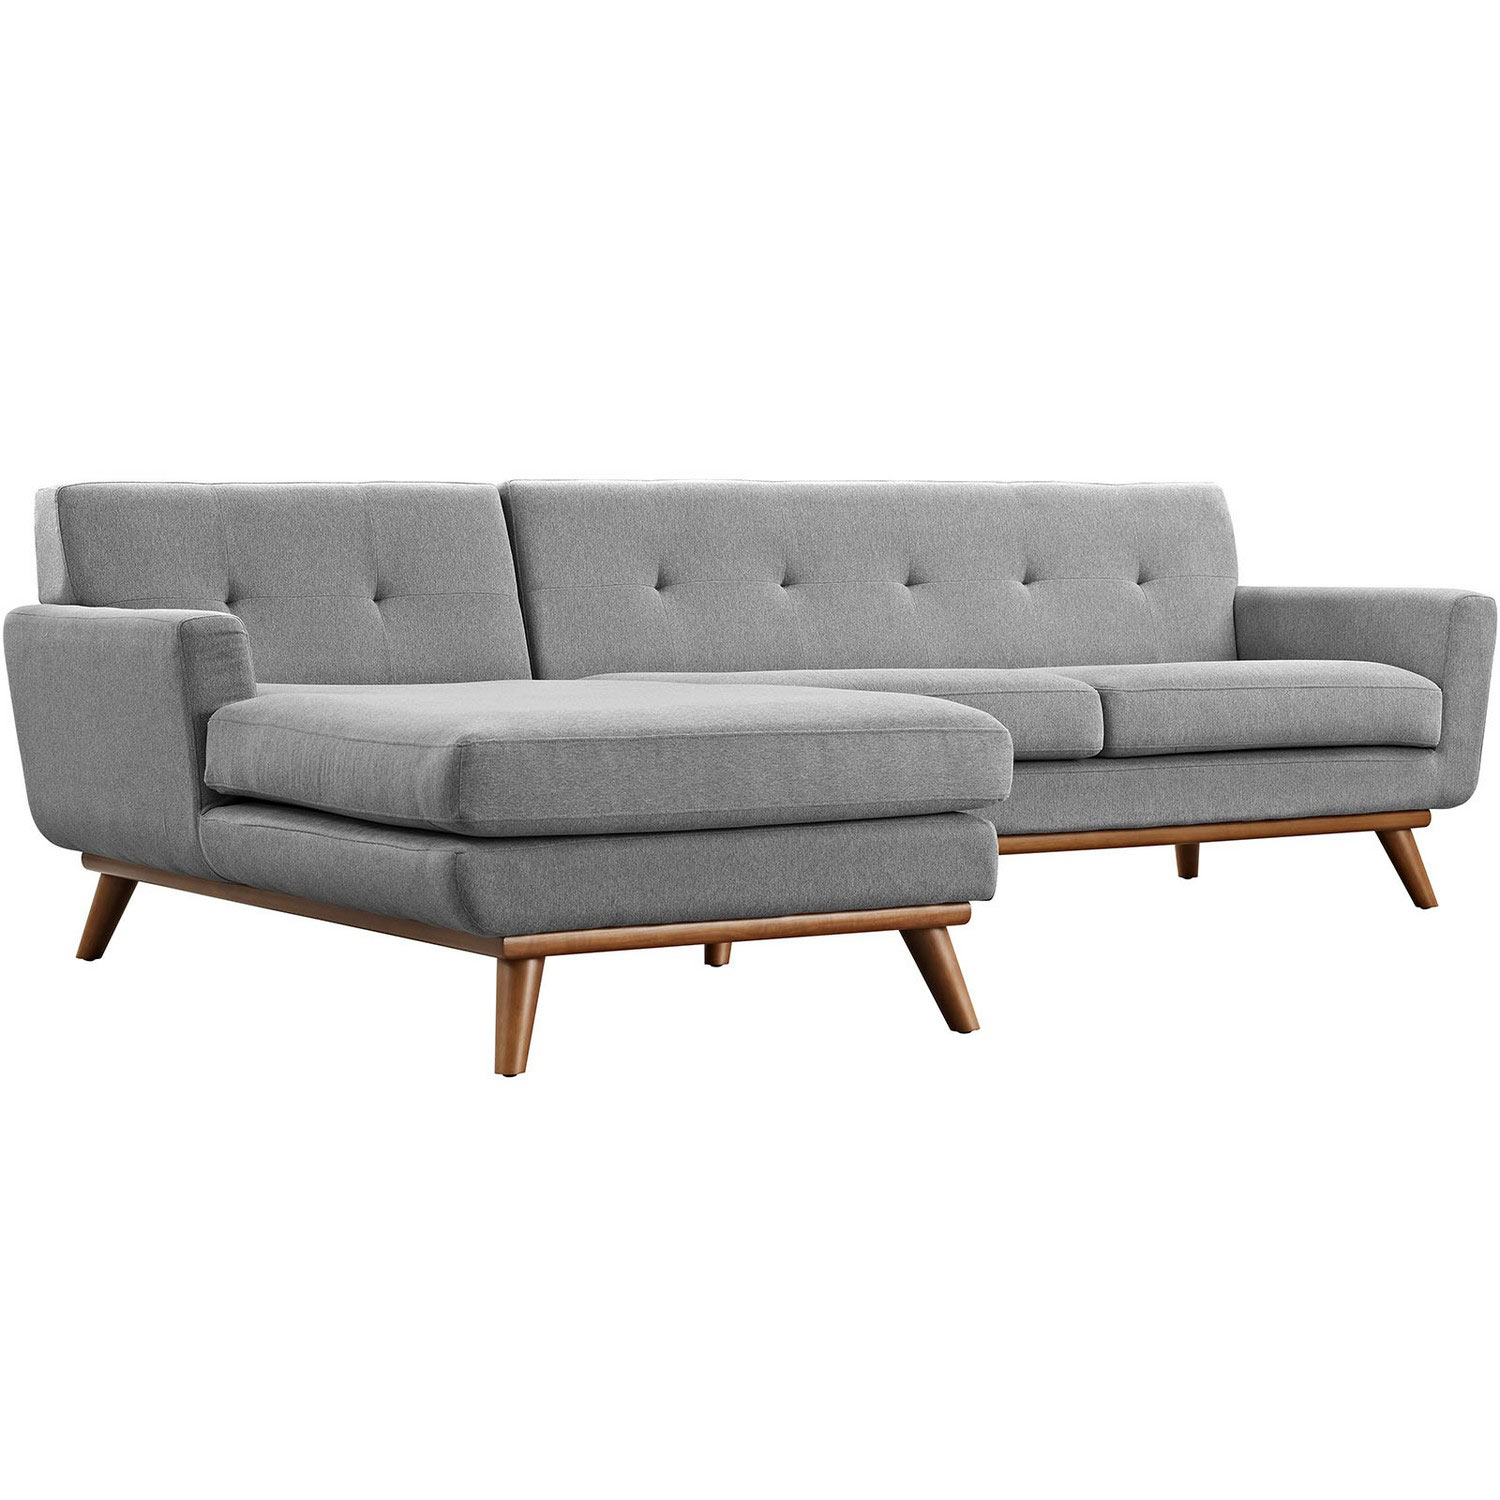 Modway Engage Left-Facing Sectional Sofa - Expectation Gray